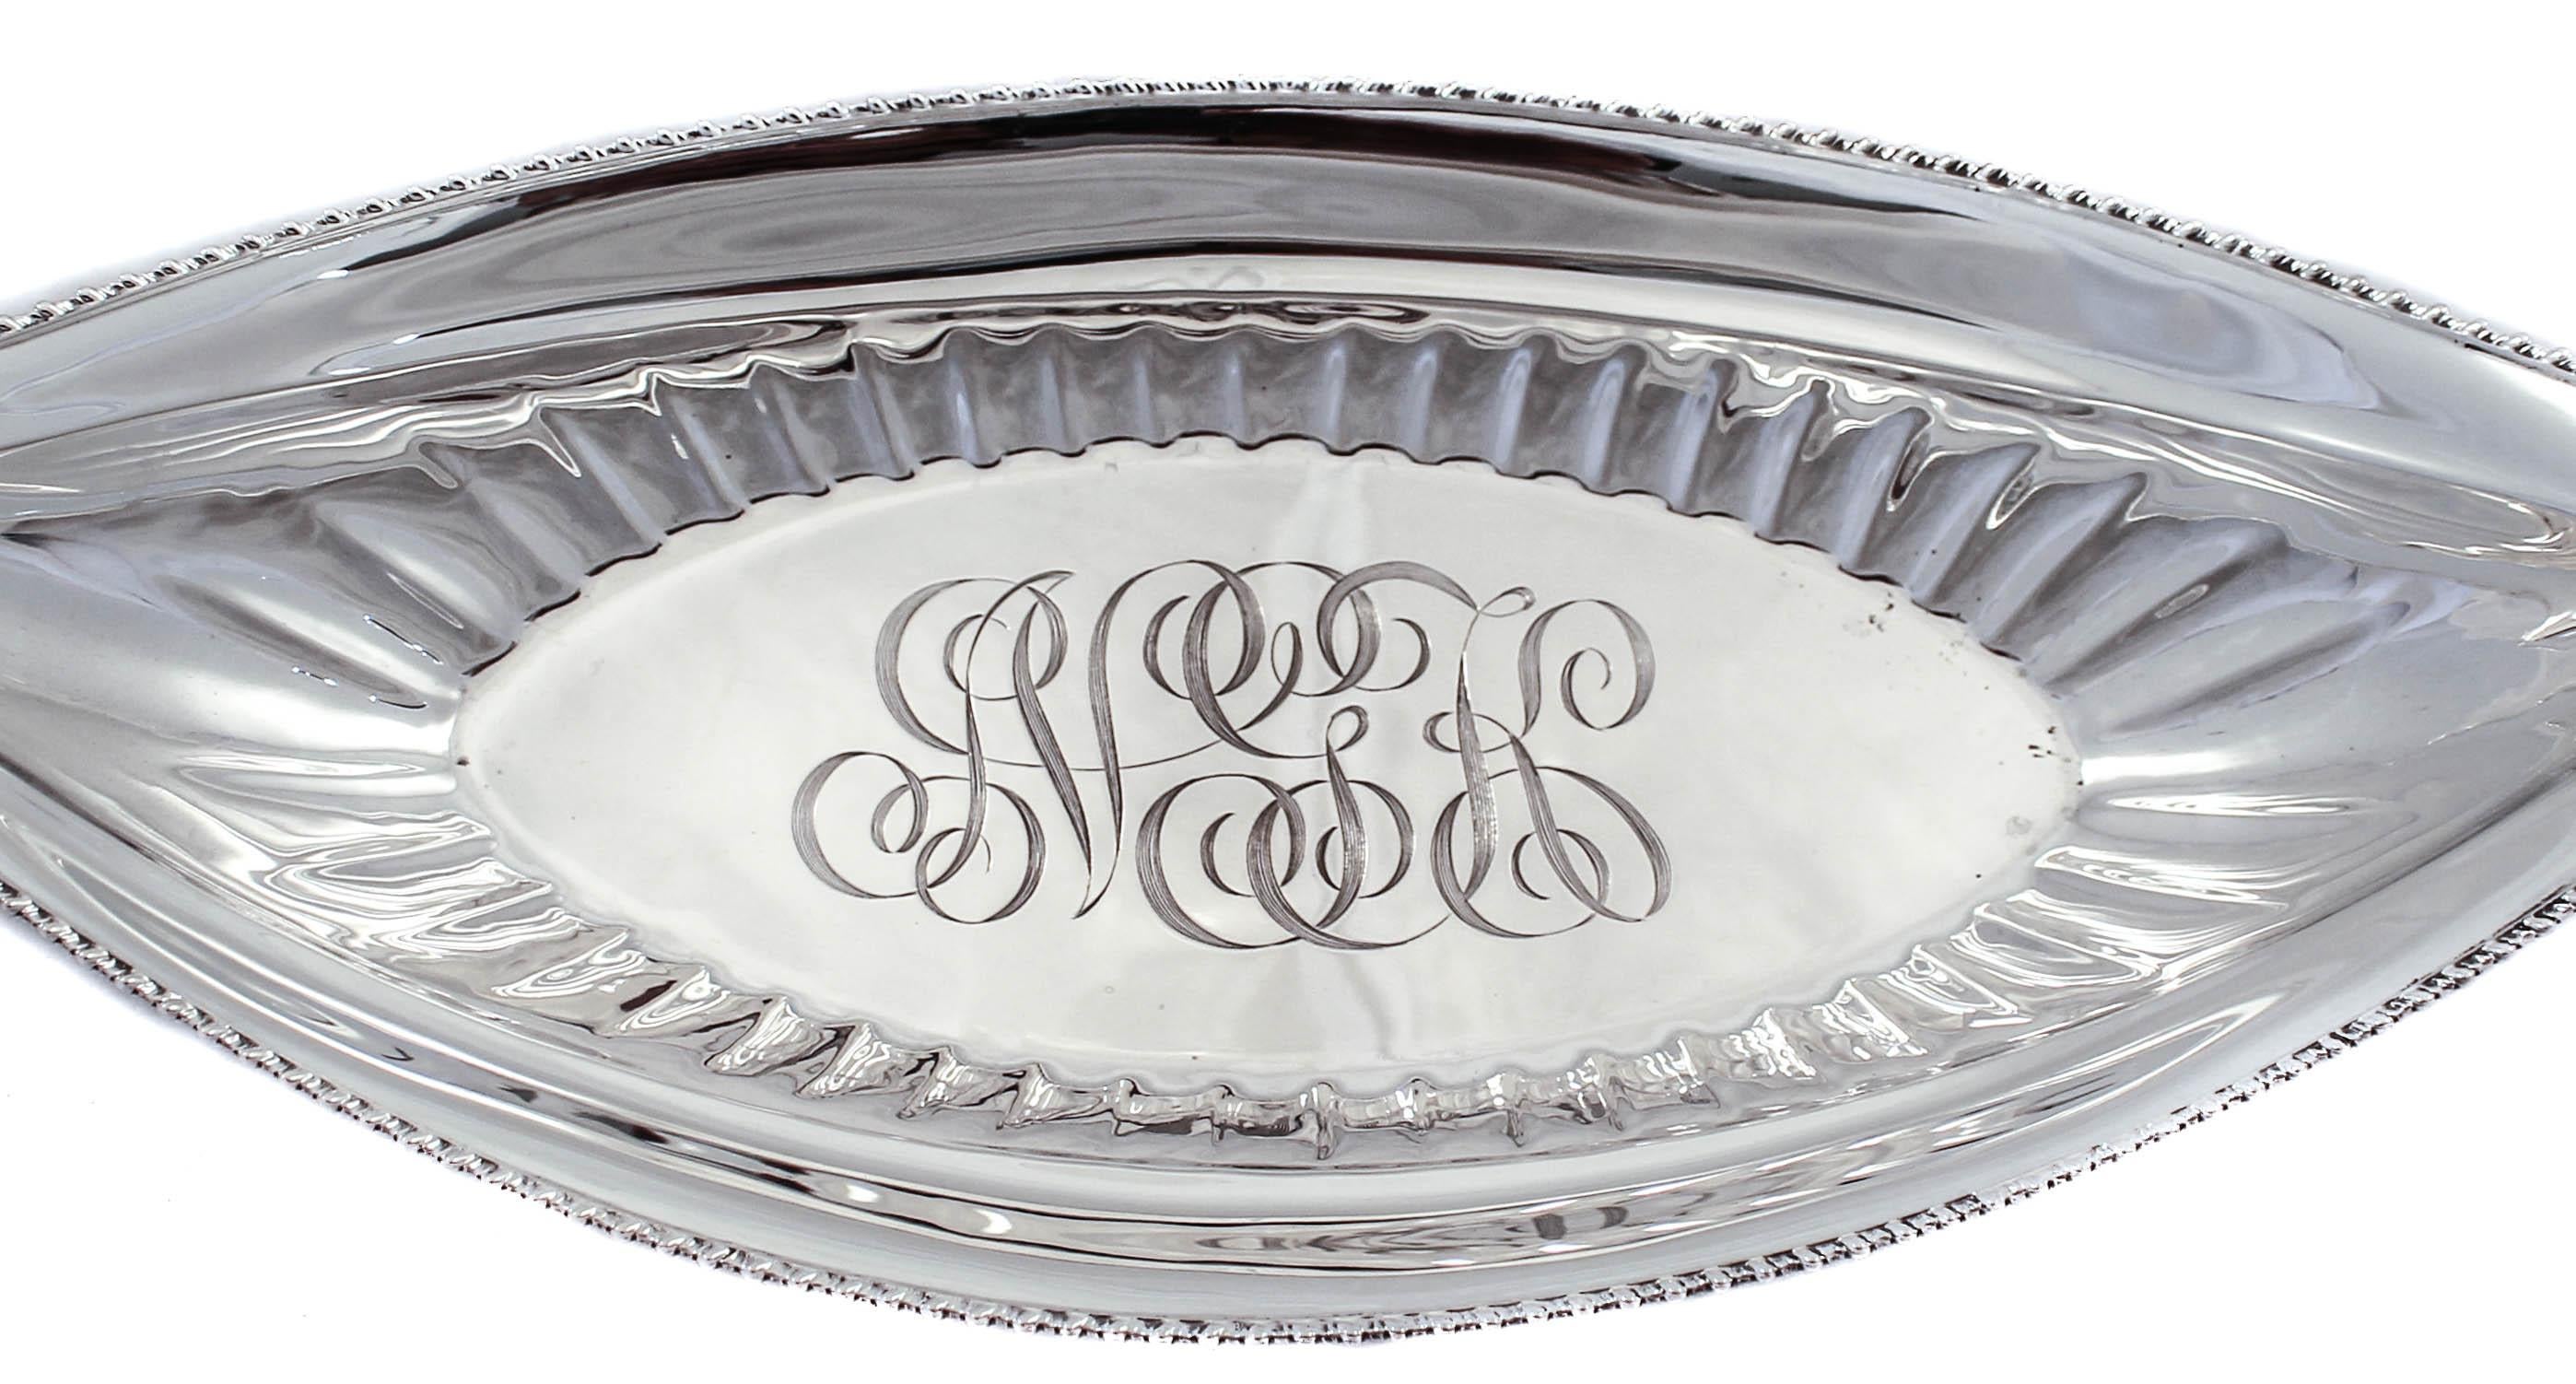 We are happy to offer this lovely sterling silver breadbasket by Towle Silversmiths. It has a canoe-like shape which is very interesting. Unlike most breadbaskets that are rounded off at the ends, the ends come to a point. Truly a classic design, it